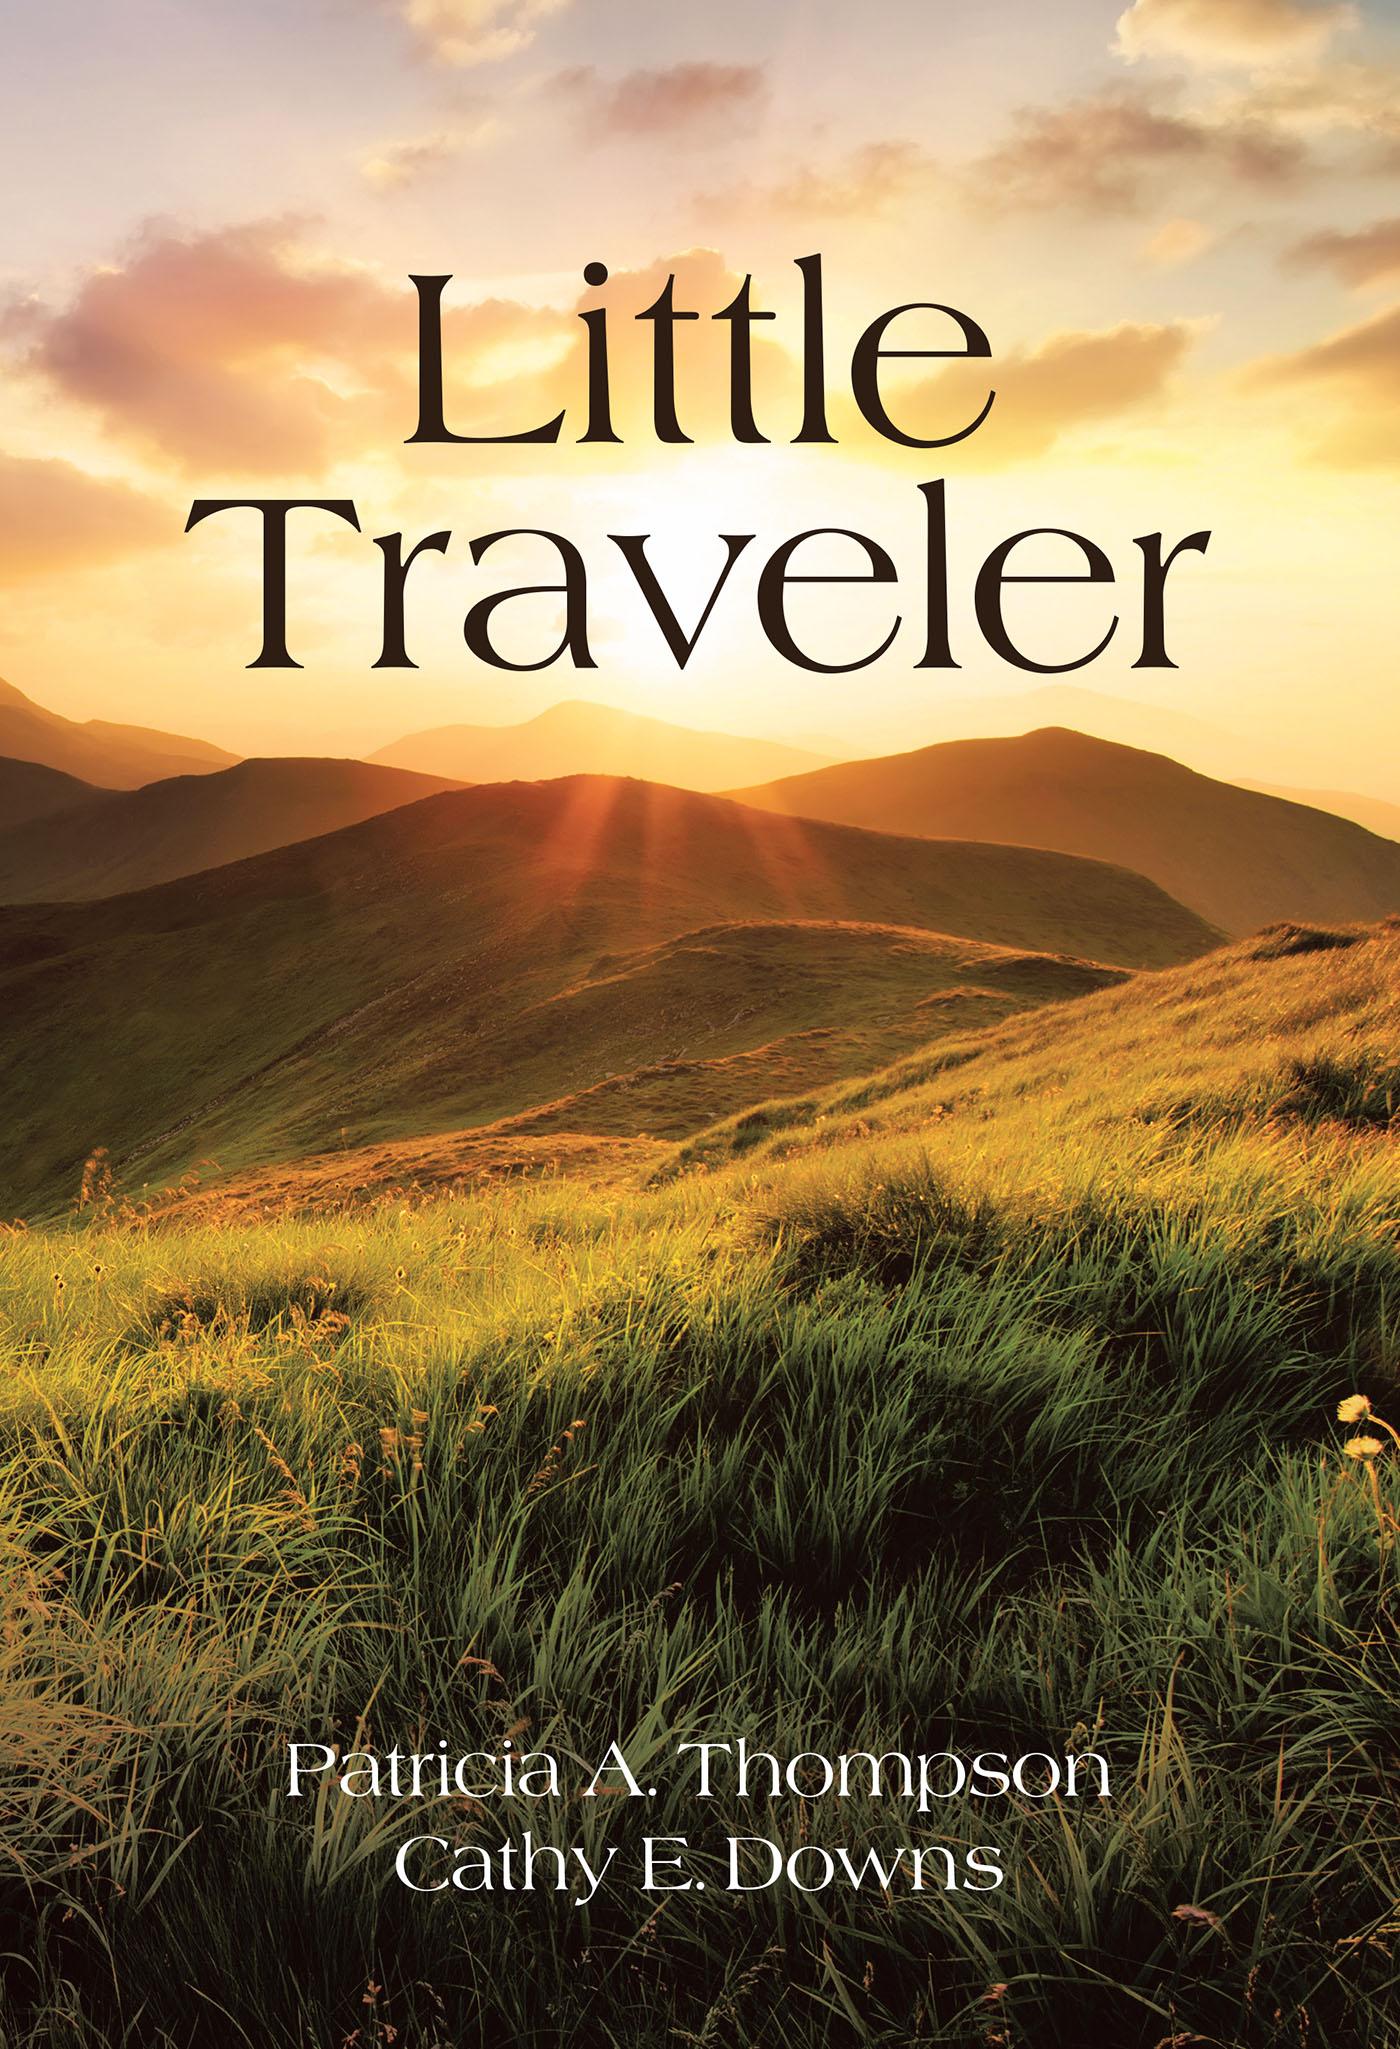 Authors Patricia A. Thompson and Cathy E. Downs’s New Book, "Little Traveler," Explores the Impactful Persons and Locations the Authors Encountered in Their Many Travels